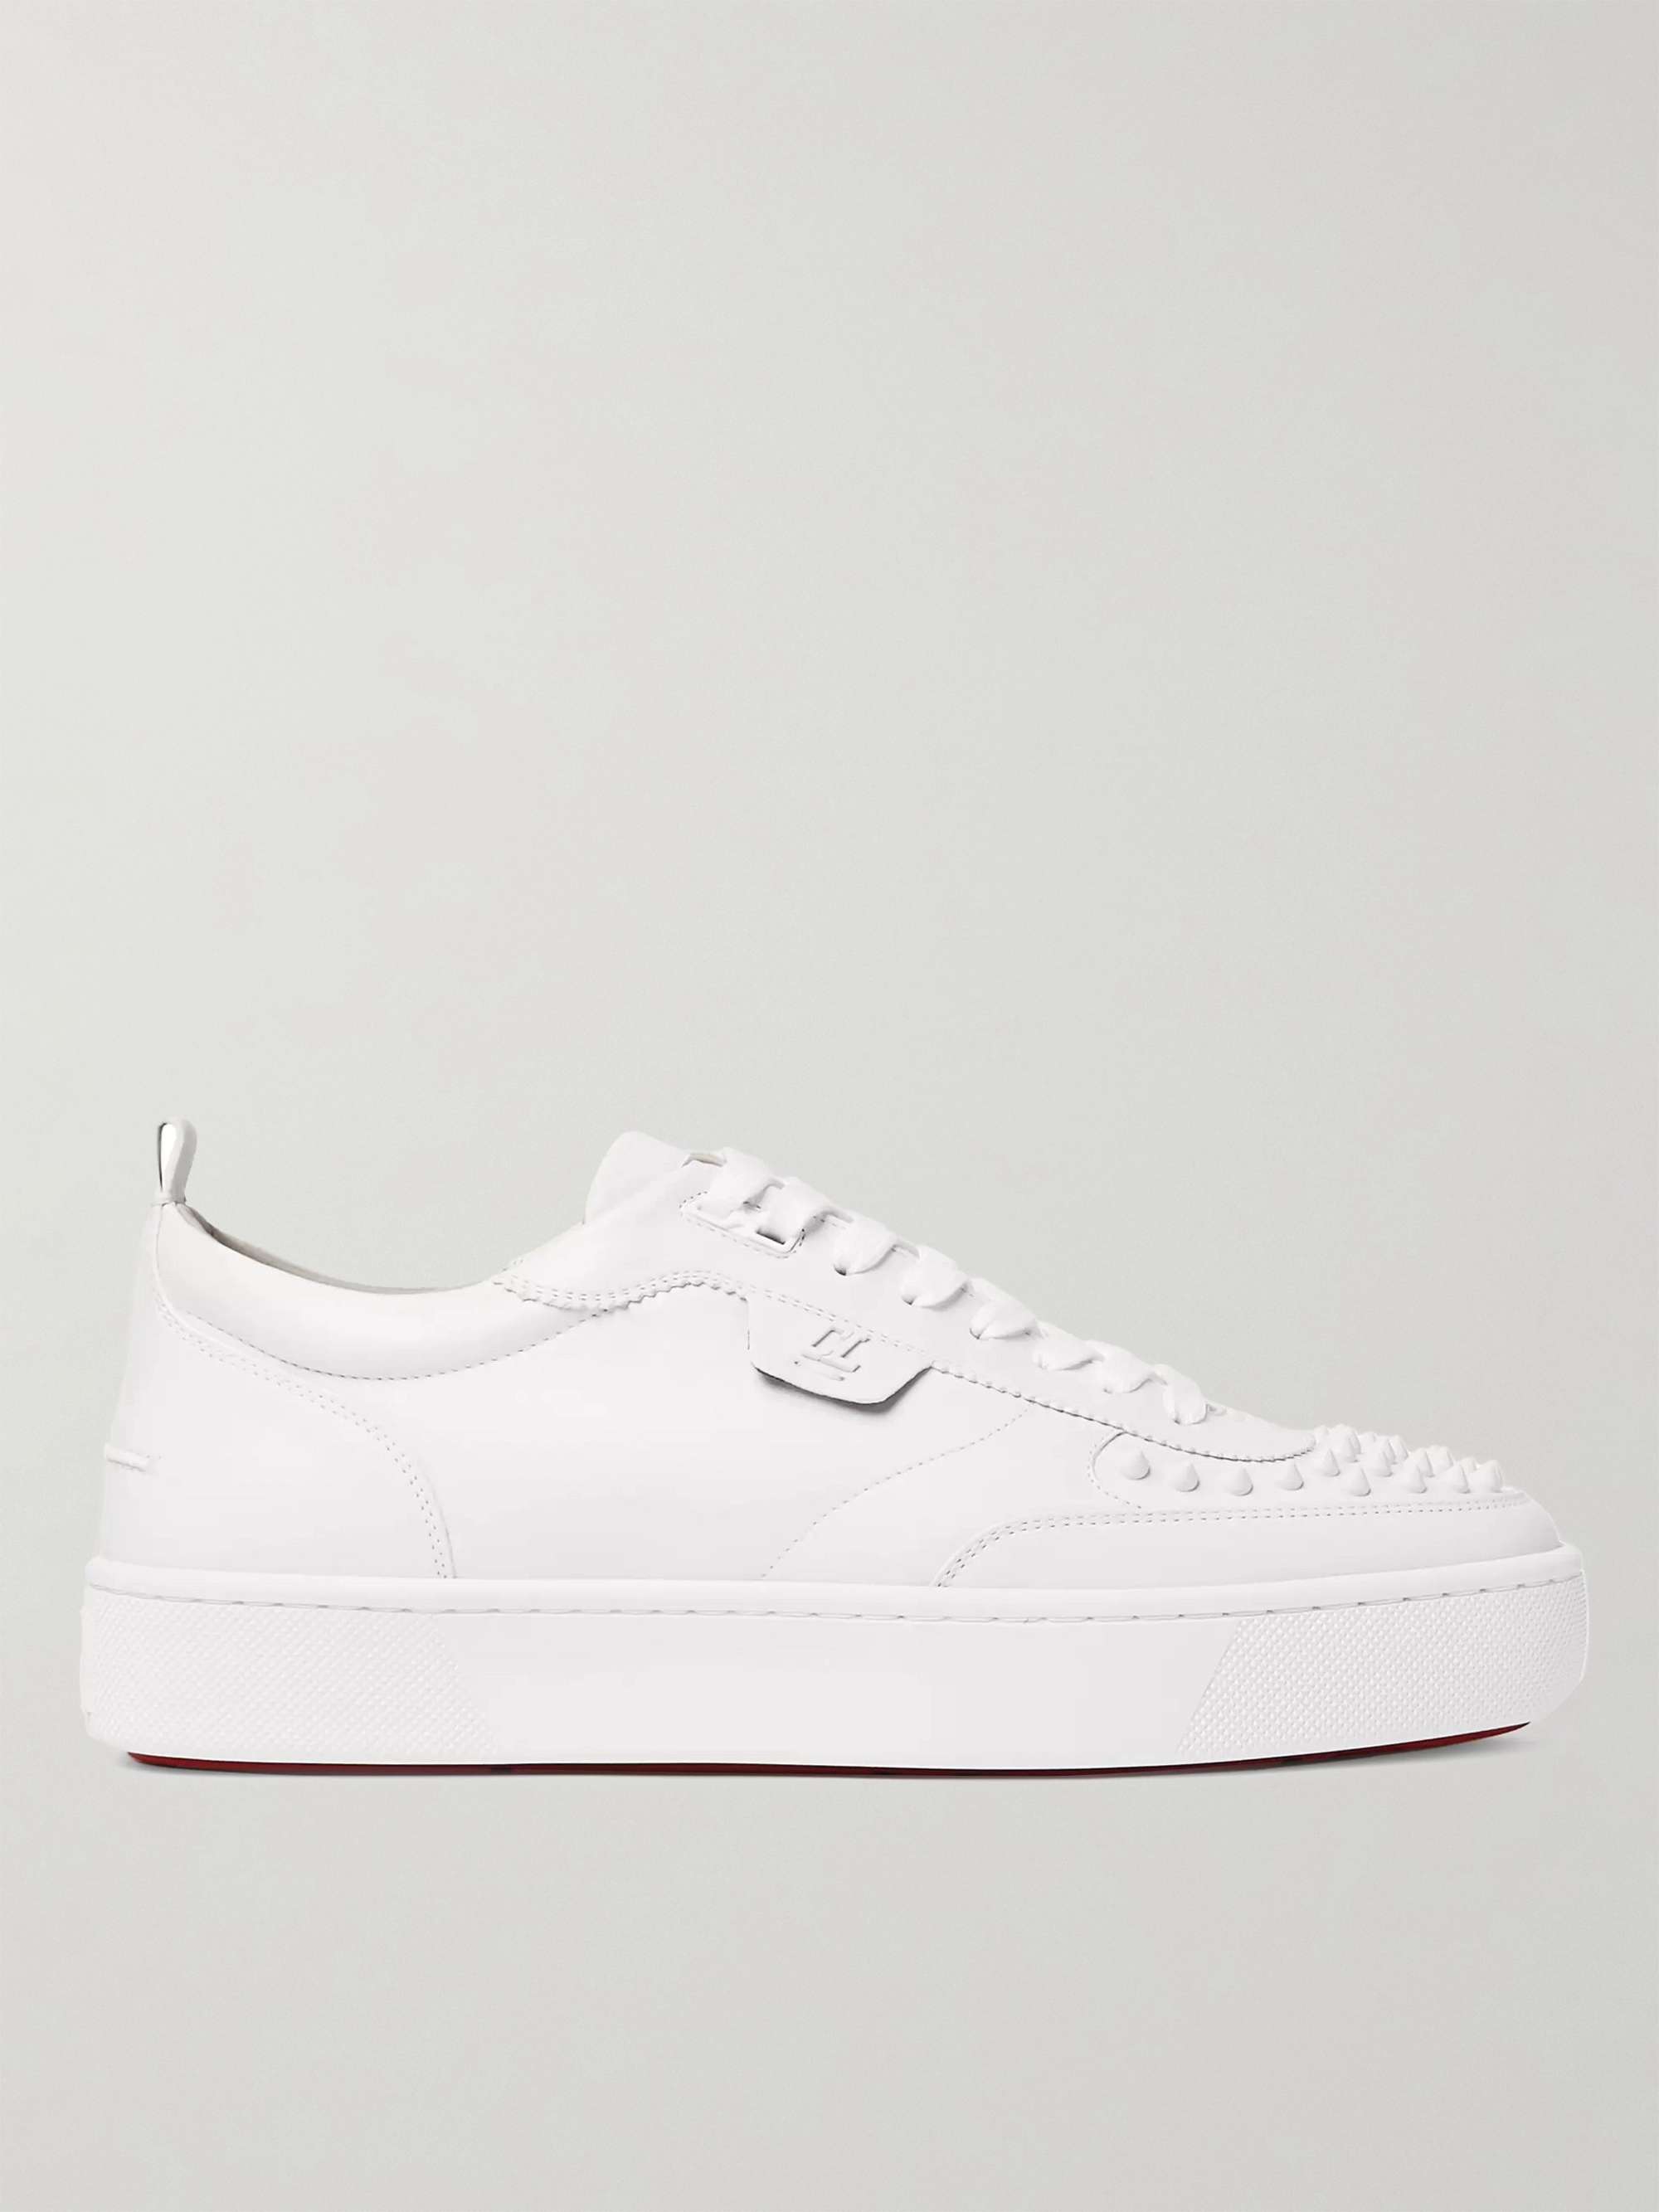 White Happyrui Spiked Leather Sneakers | CHRISTIAN LOUBOUTIN | MR PORTER